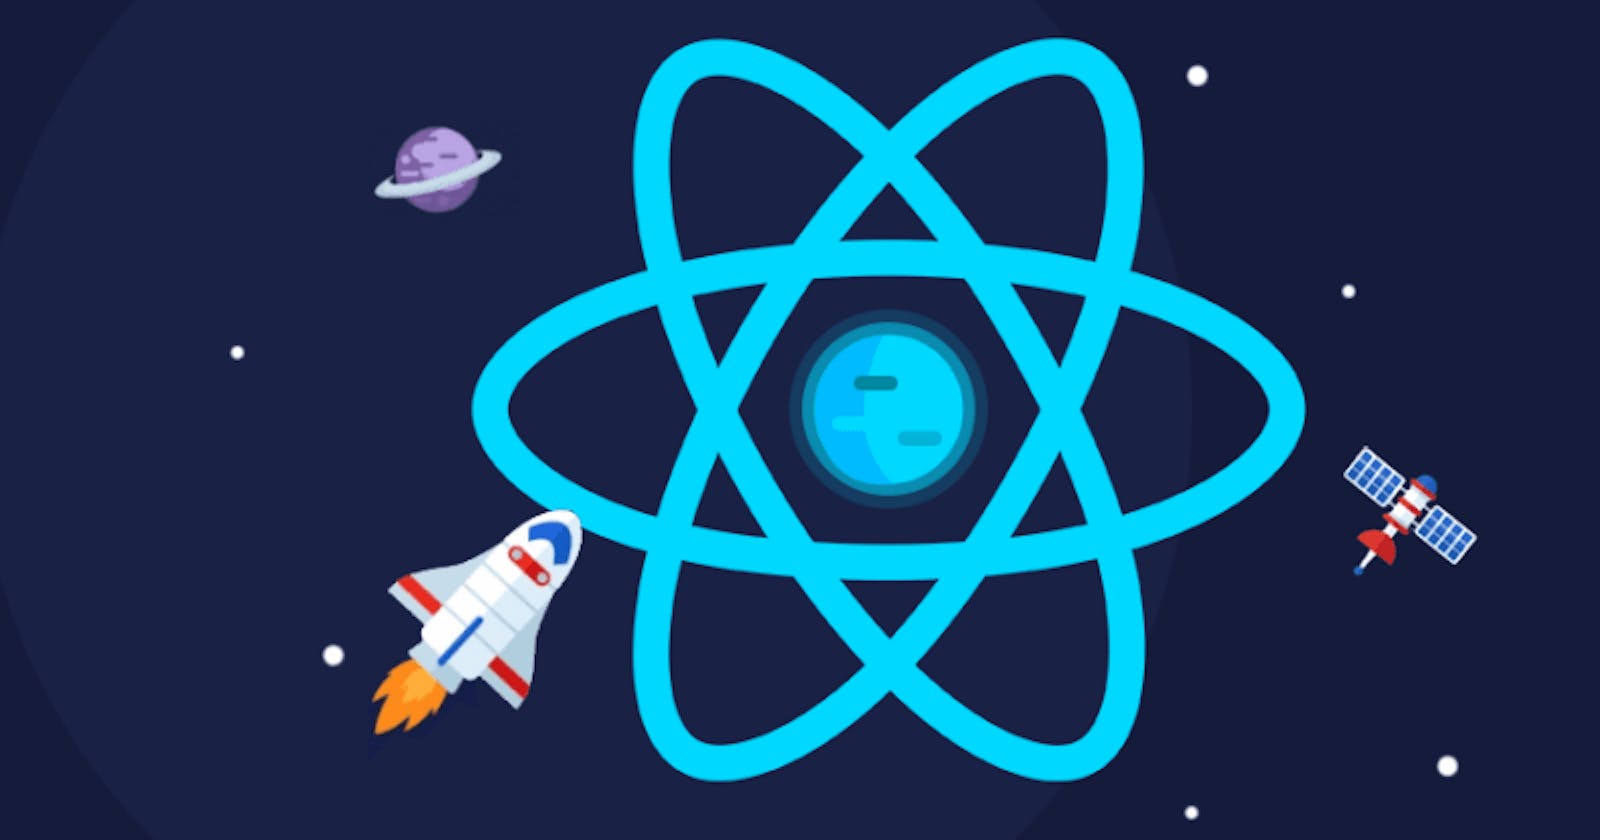 Essential concepts you need to know about React